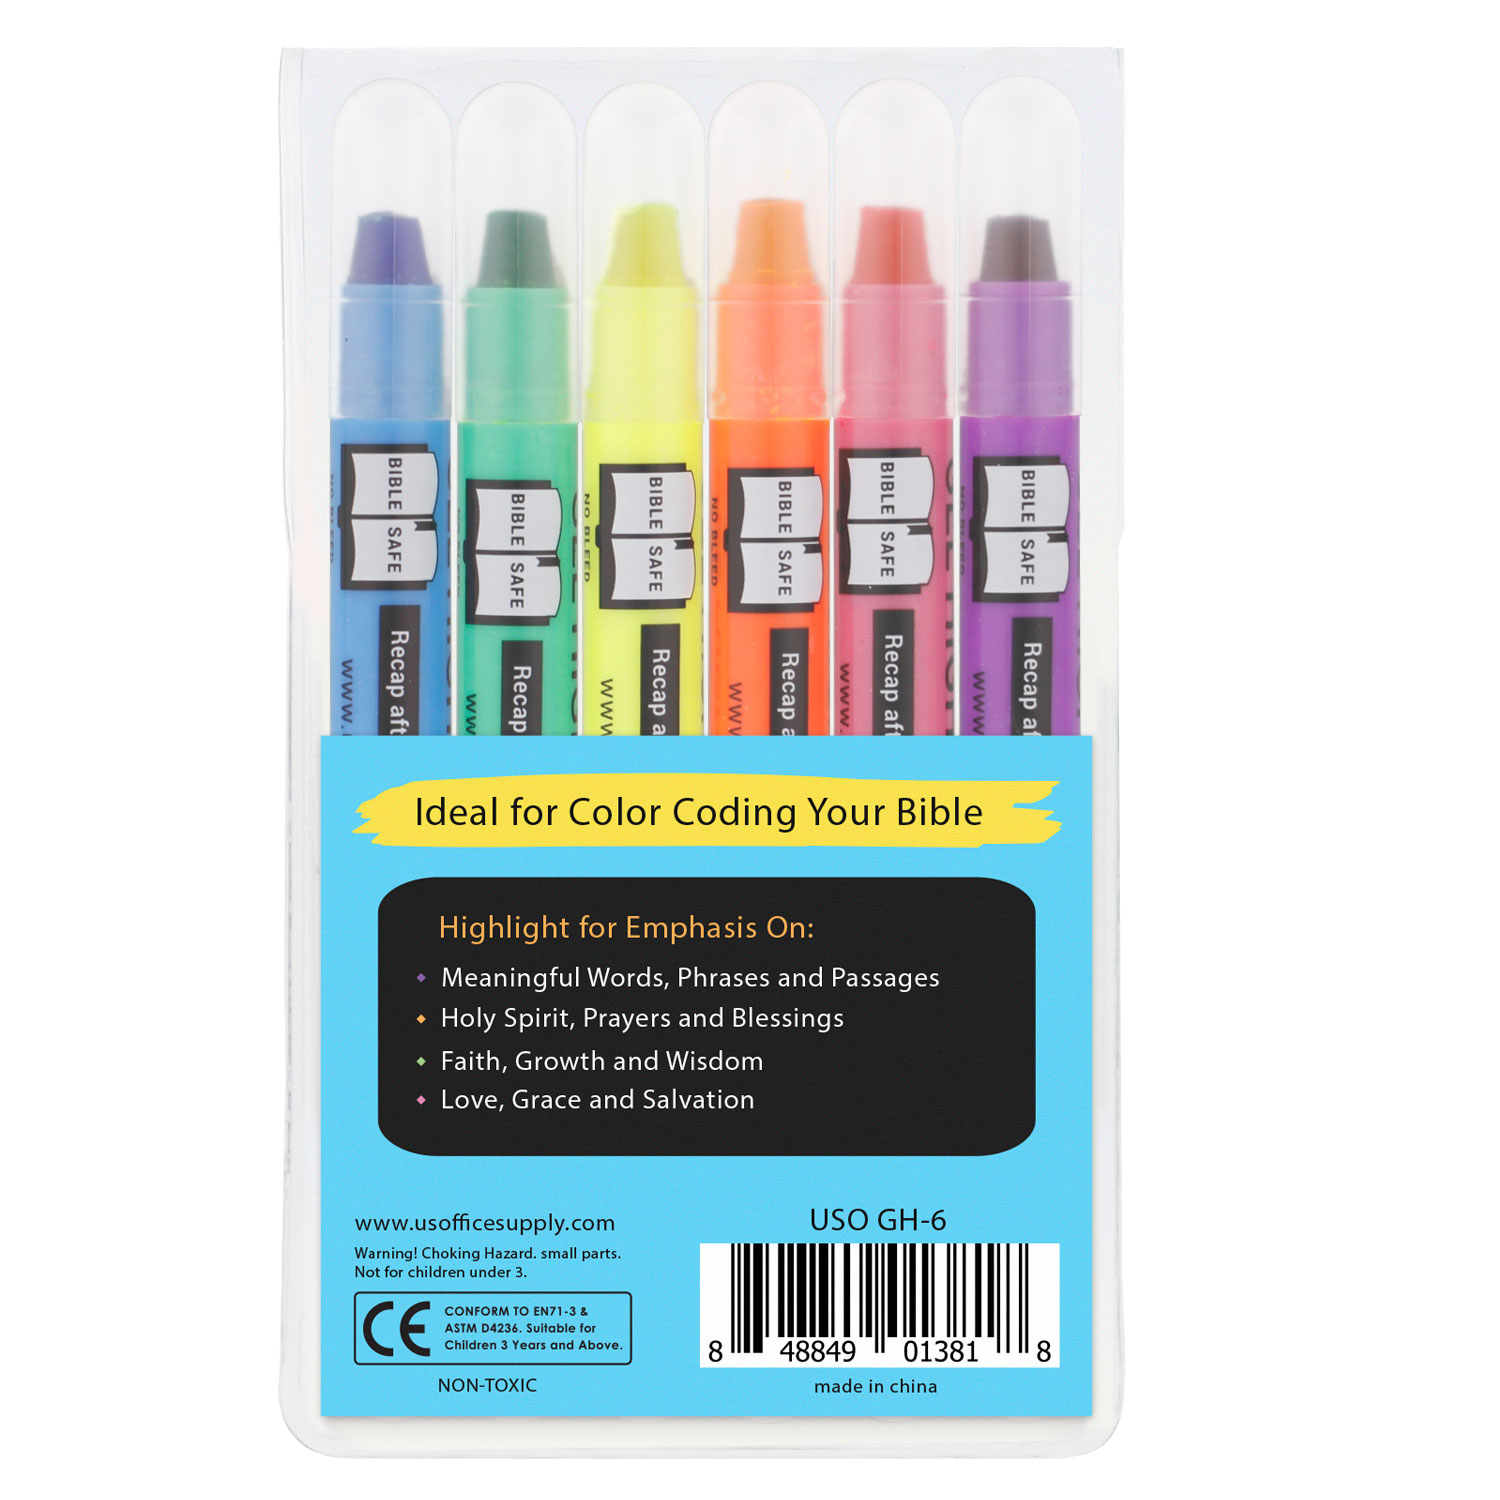 U.S. Office Supply Bible Safe Gel Highlighters, 6 Pack Set - 6 Different  Bright Neon Fluorescent Highlight Colors Yellow, Orange, Pink, Purple,  Green, Blue - Won't Bleed, Fade or Smear - Study Guide 